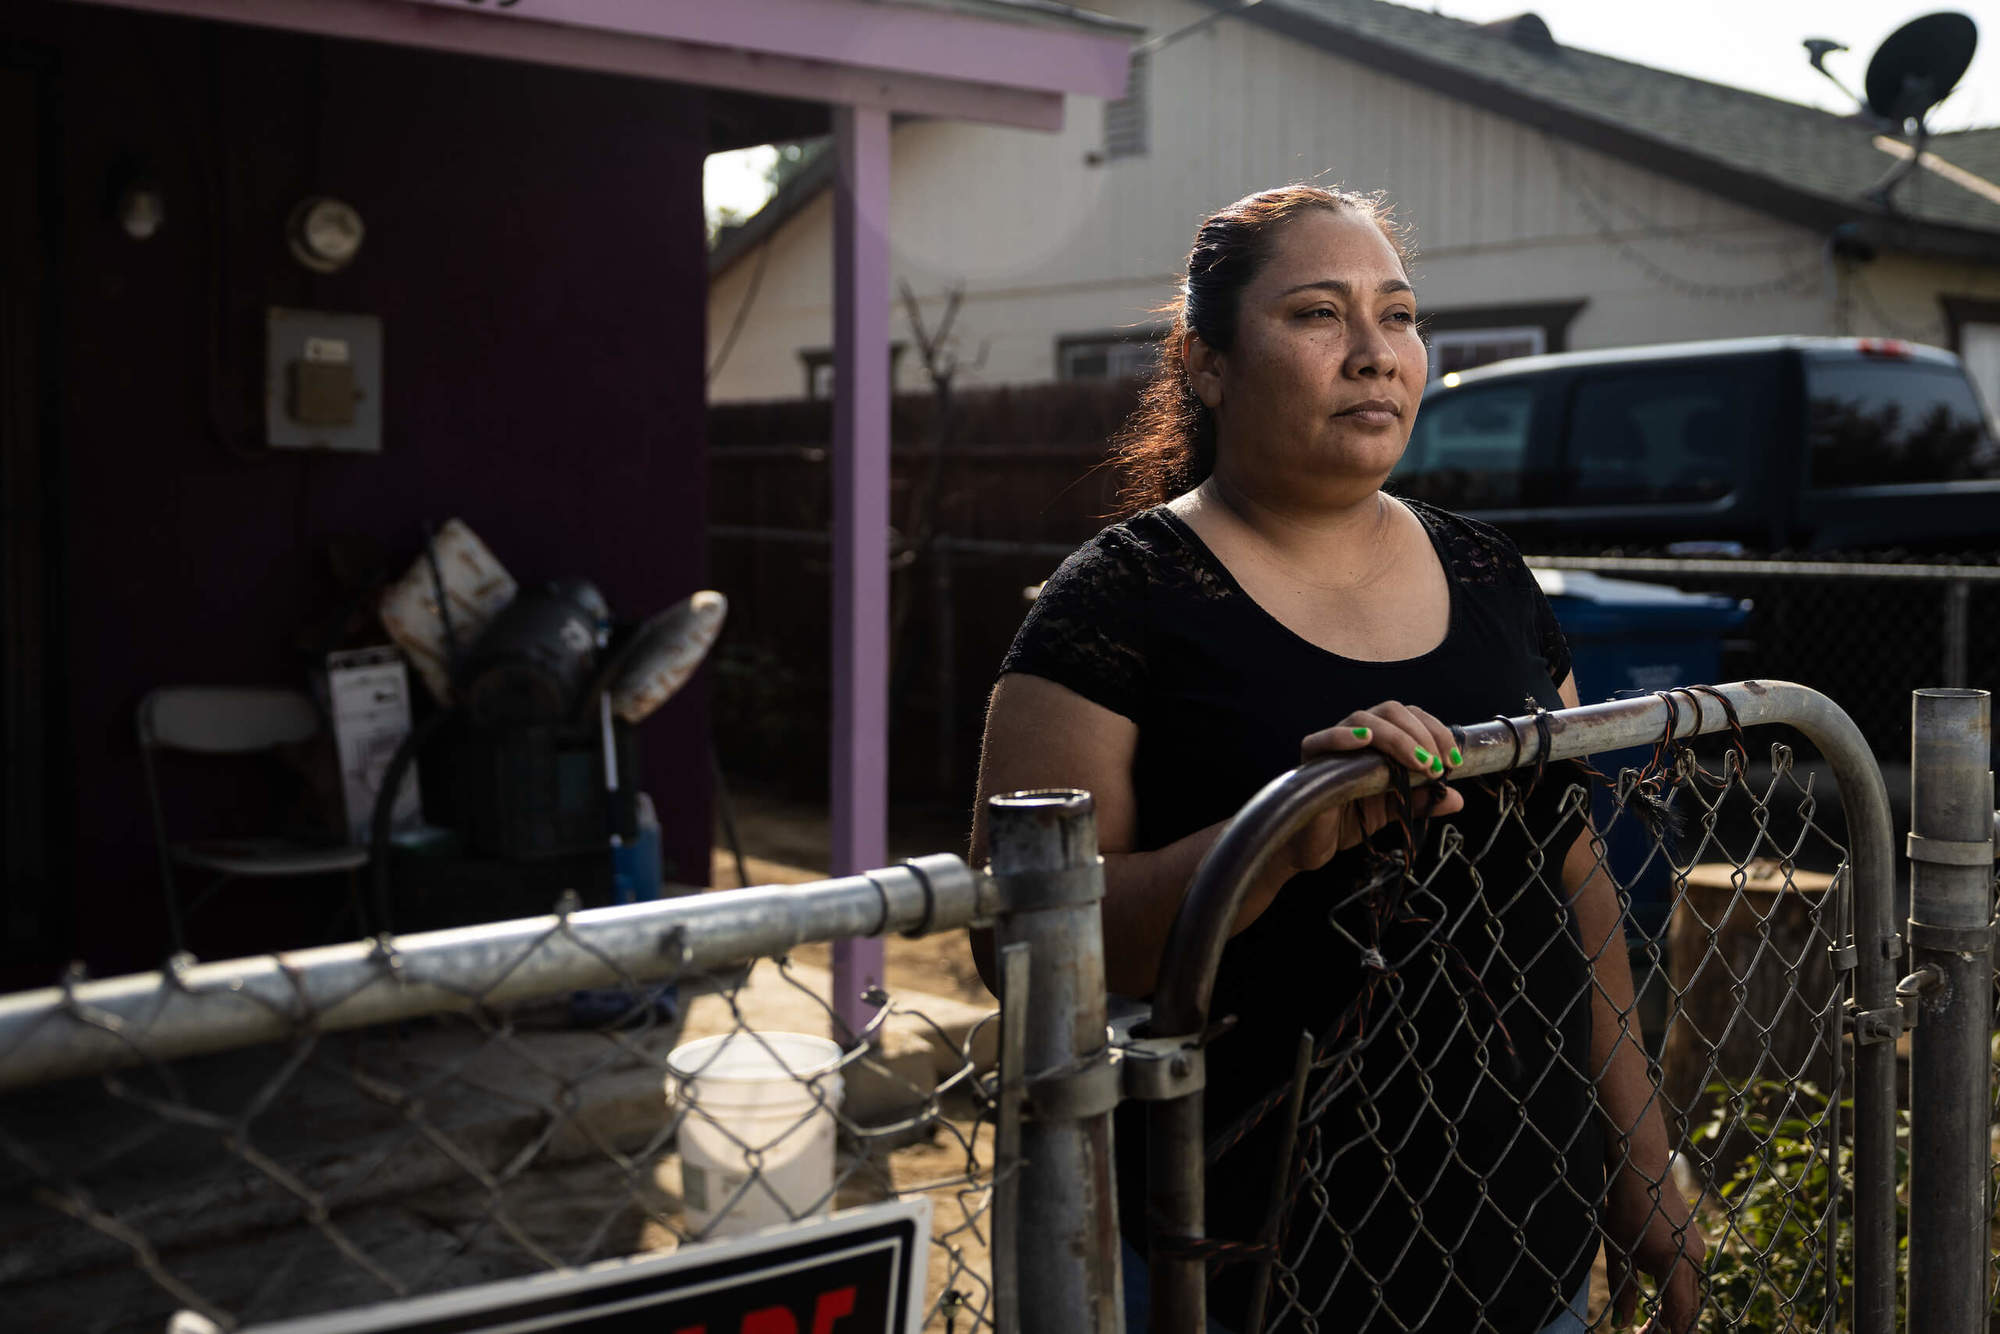 Rosa Perez worries while standing by fence and in black shirt what many years of consuming the tap water in Fuller Acres February 2022 social.